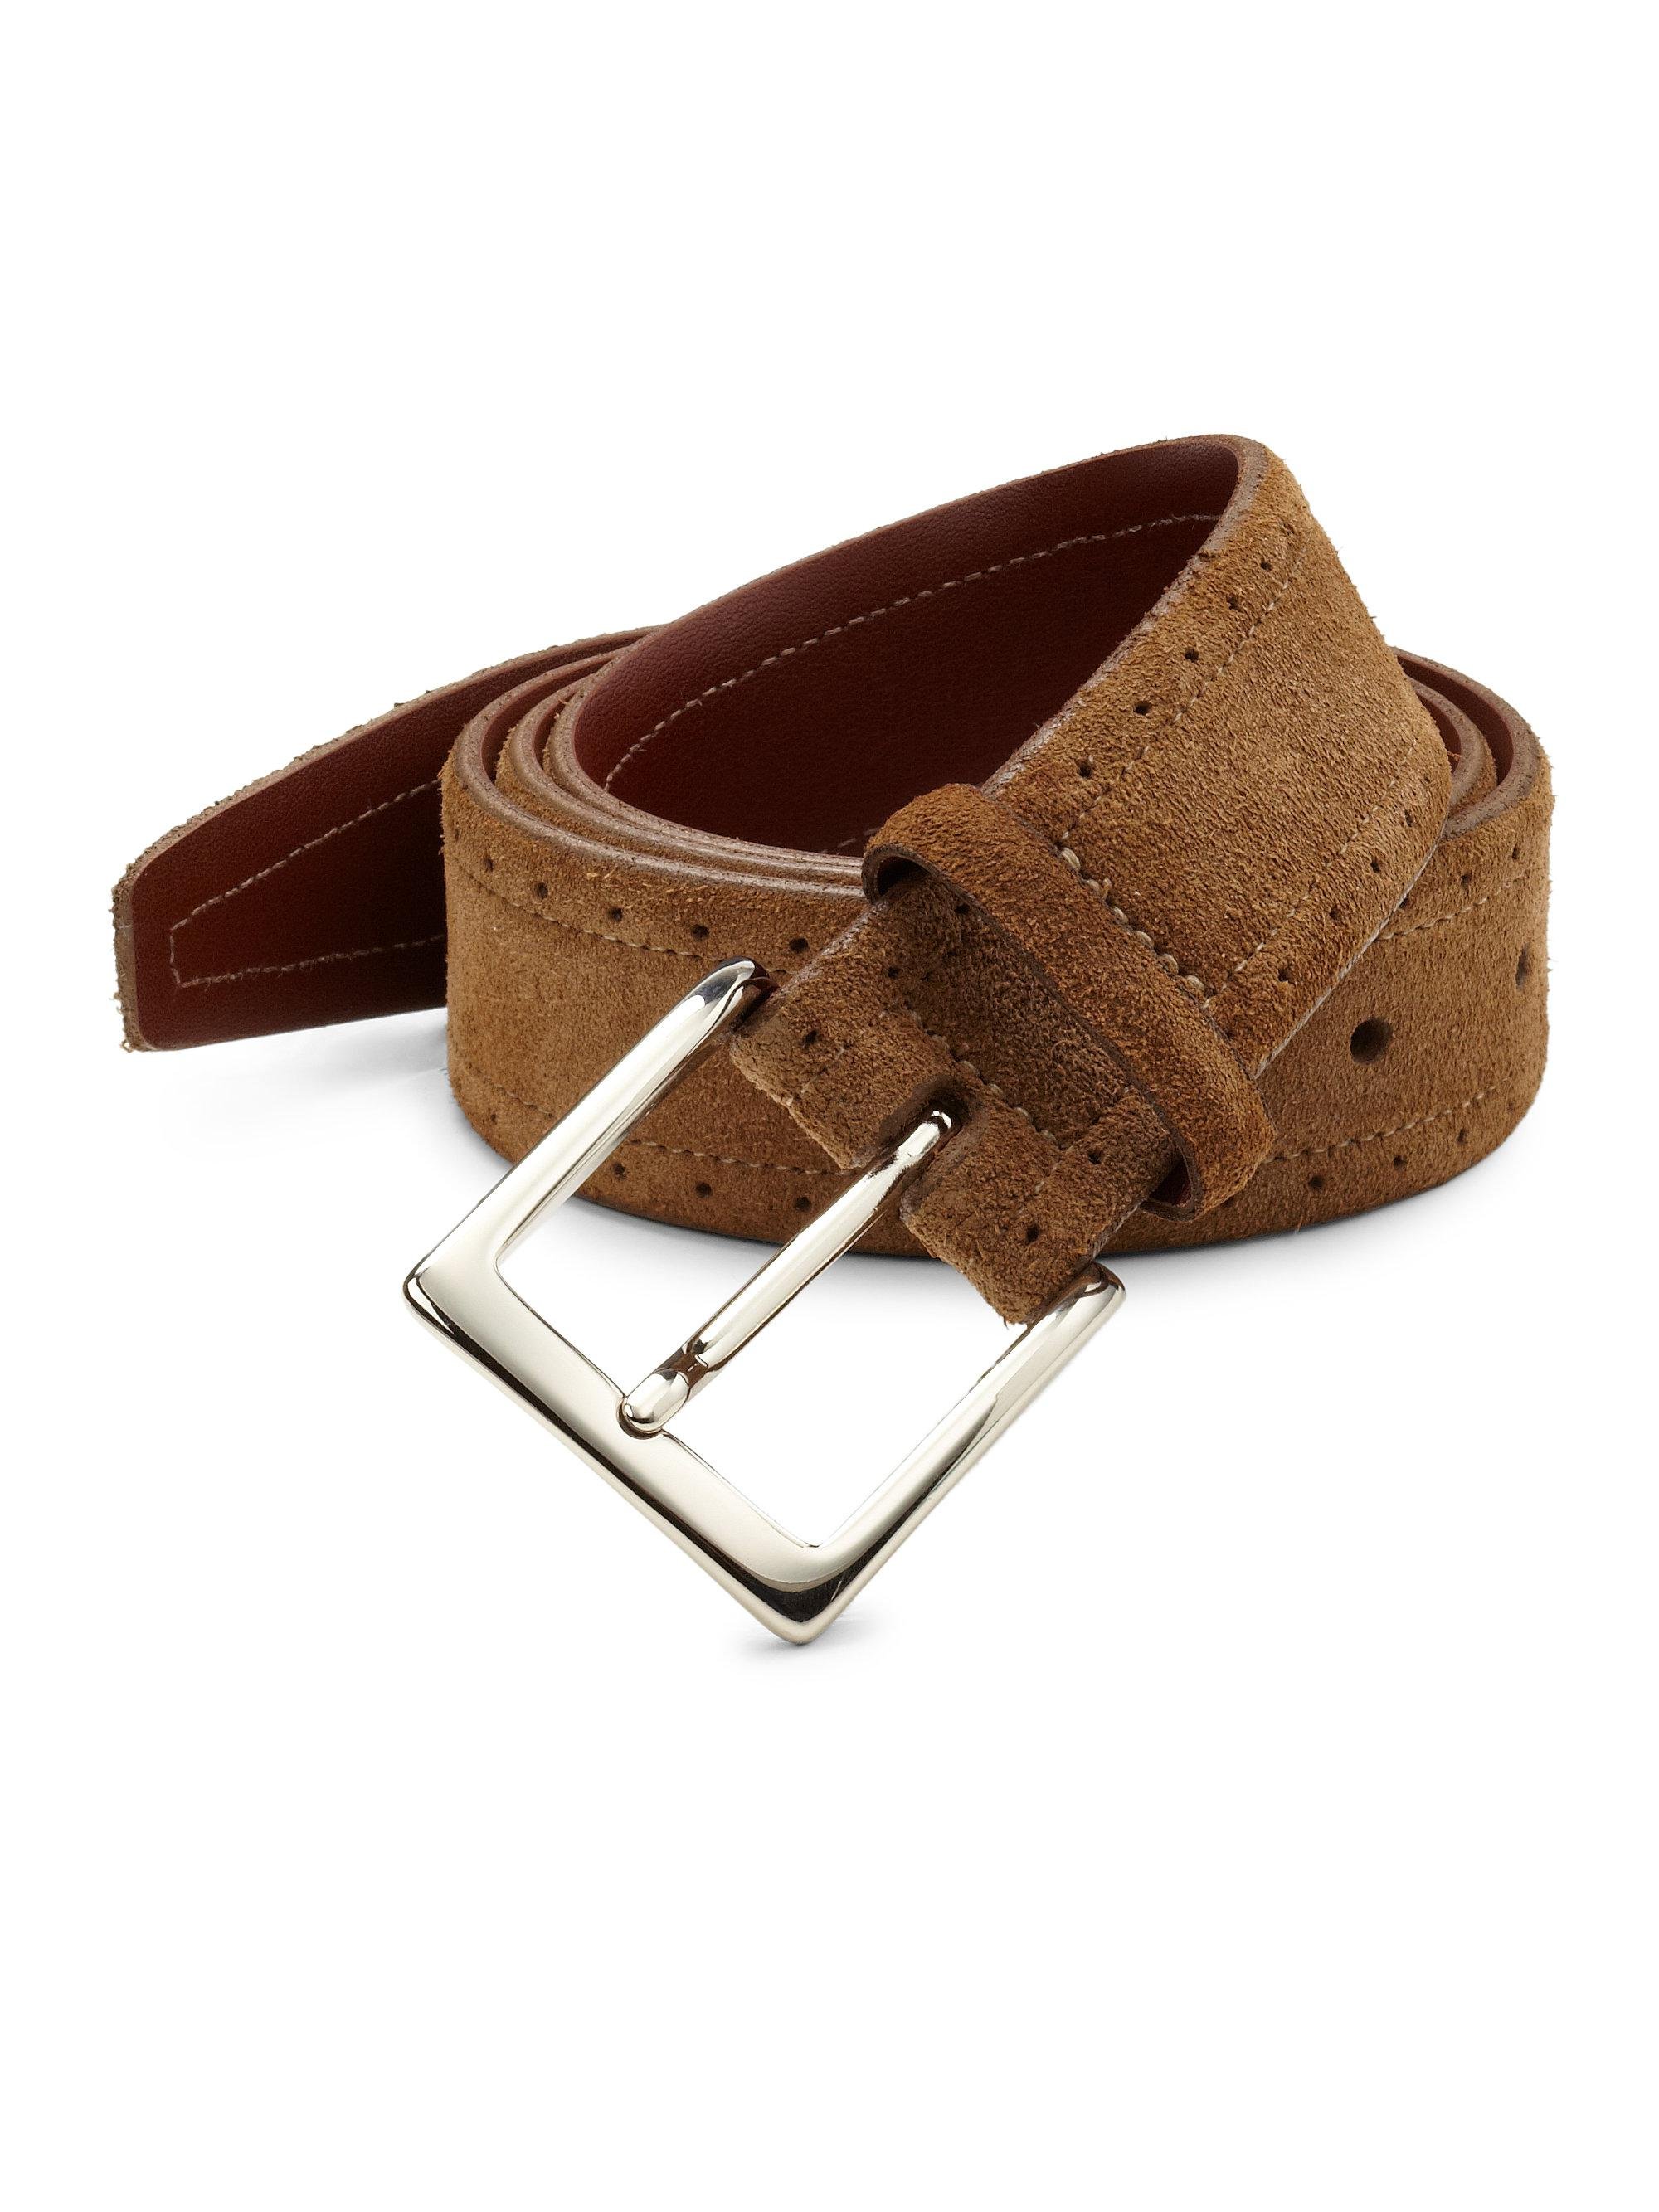 Lyst - Saks Fifth Avenue Collection Perforated Suede Belt in Brown for Men